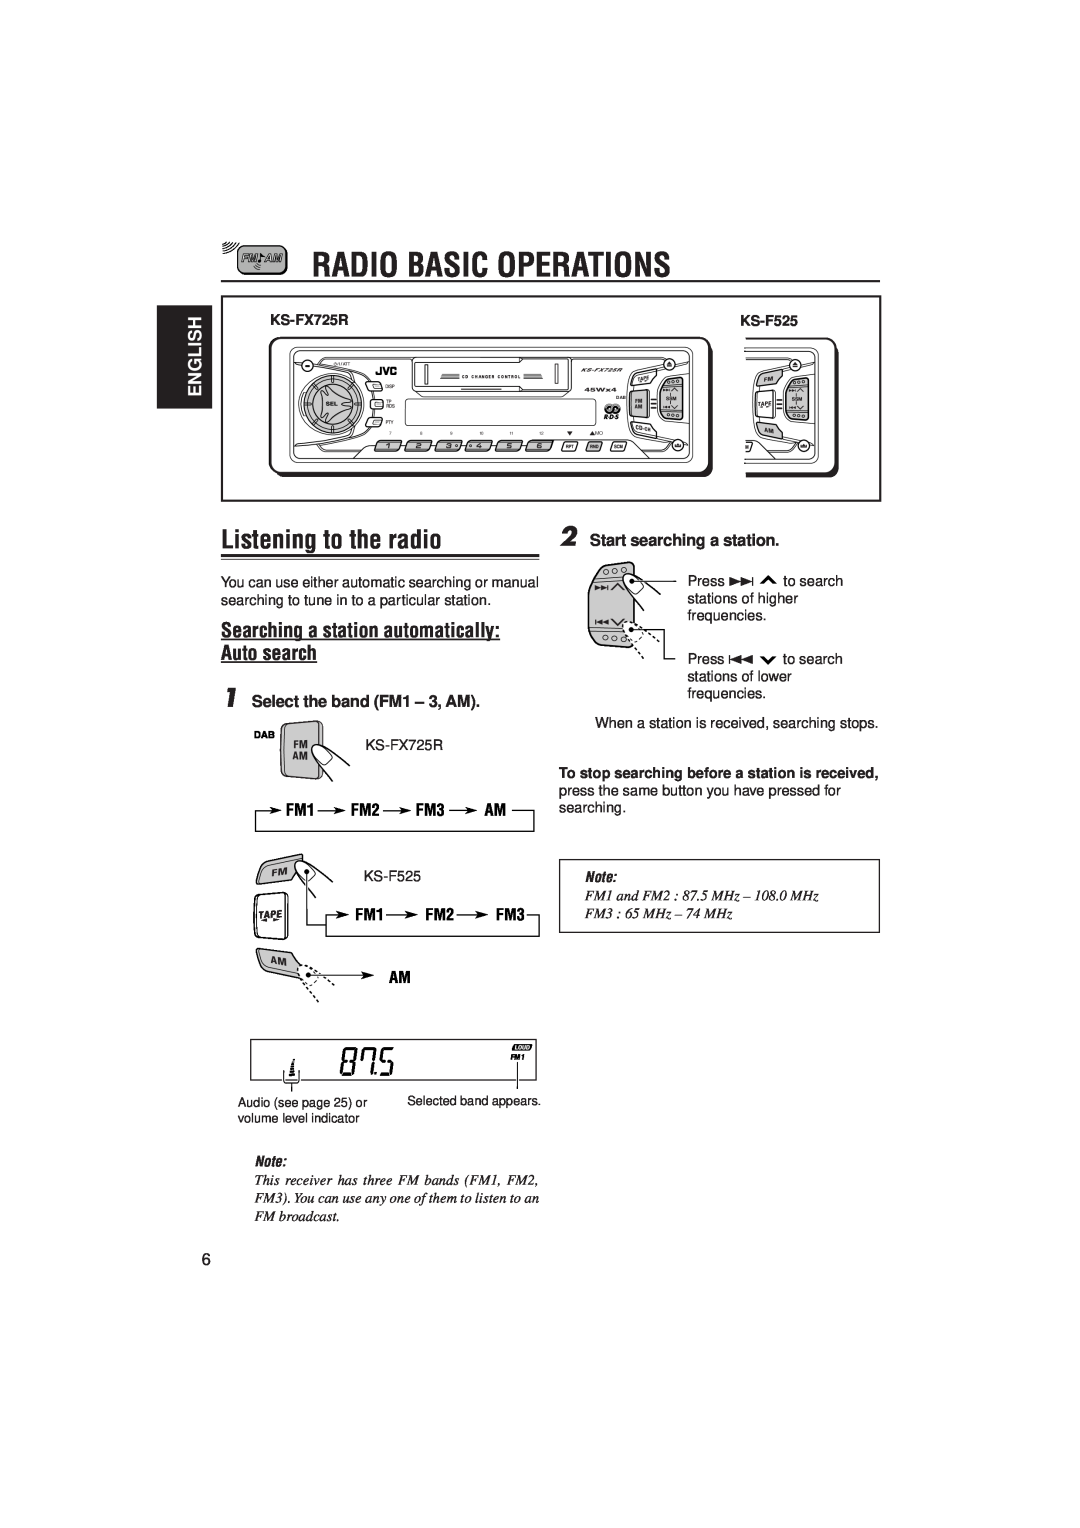 JVC KS-FX725R Radio Basic Operations, Listening to the radio, Searching a station automatically Auto search, English, Disp 